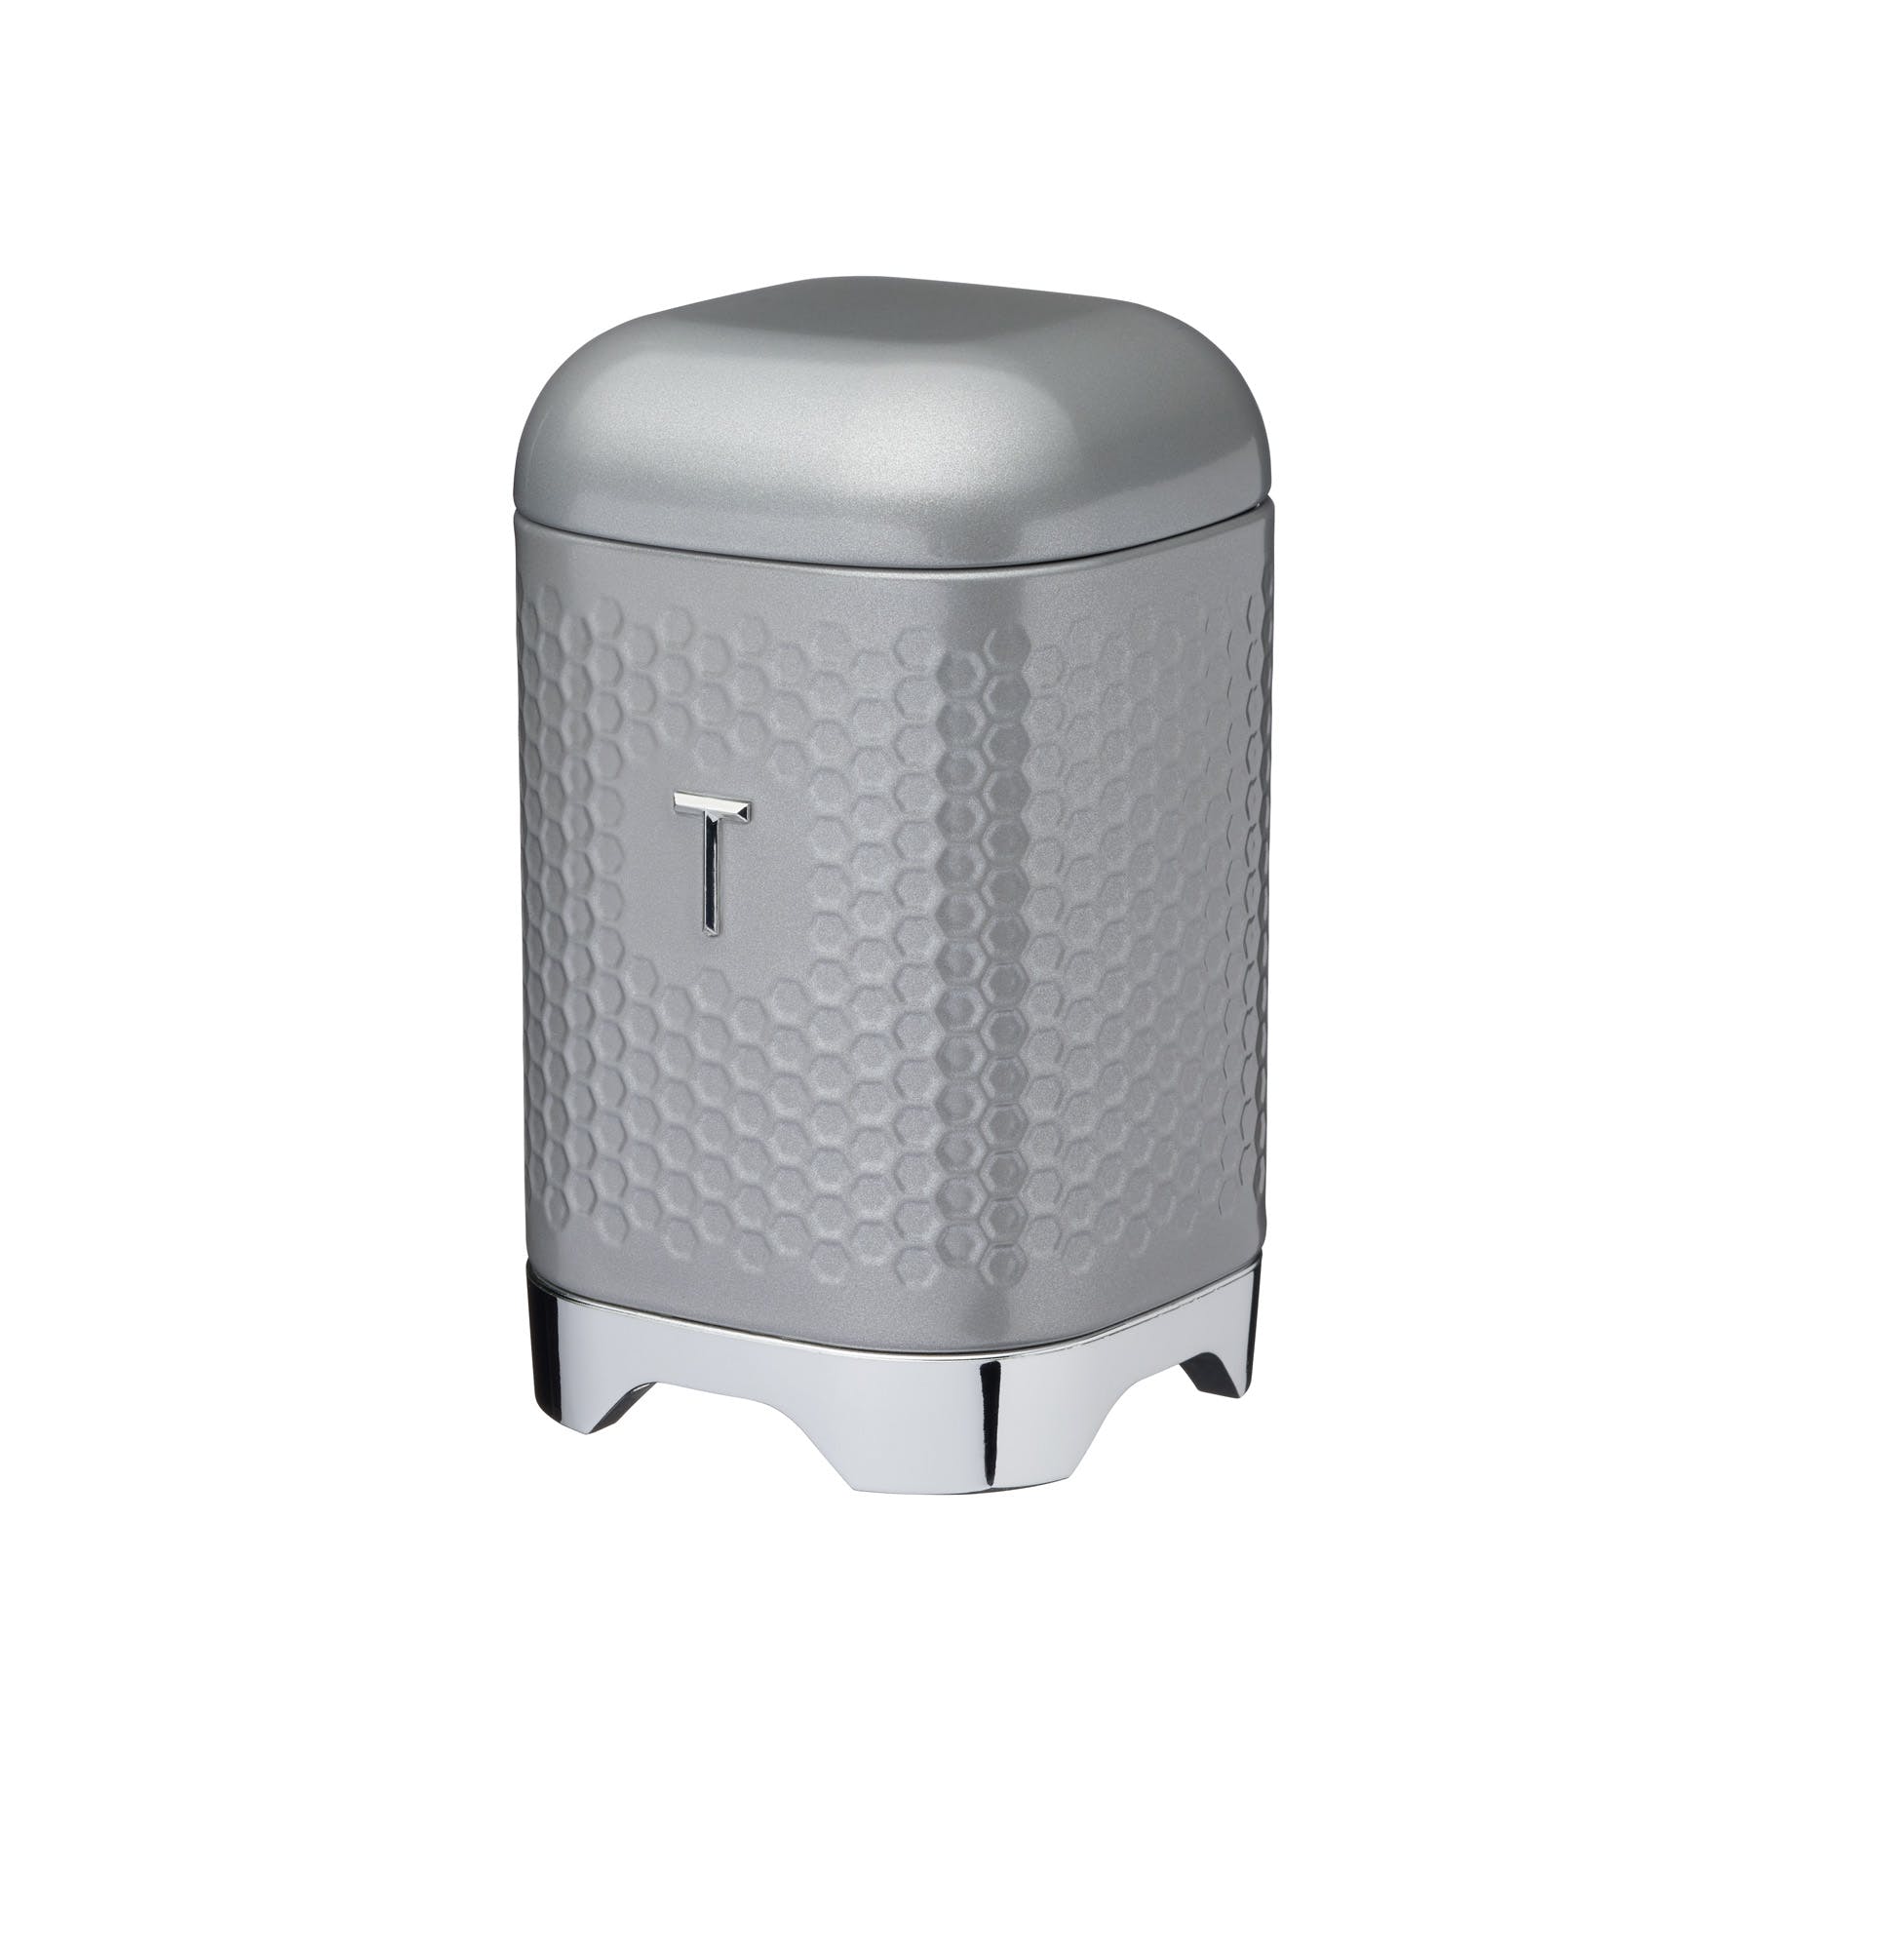 Lovello Retro Tea Canister with Geometric Textured Finish - Shadow Grey - The Cooks Cupboard Ltd